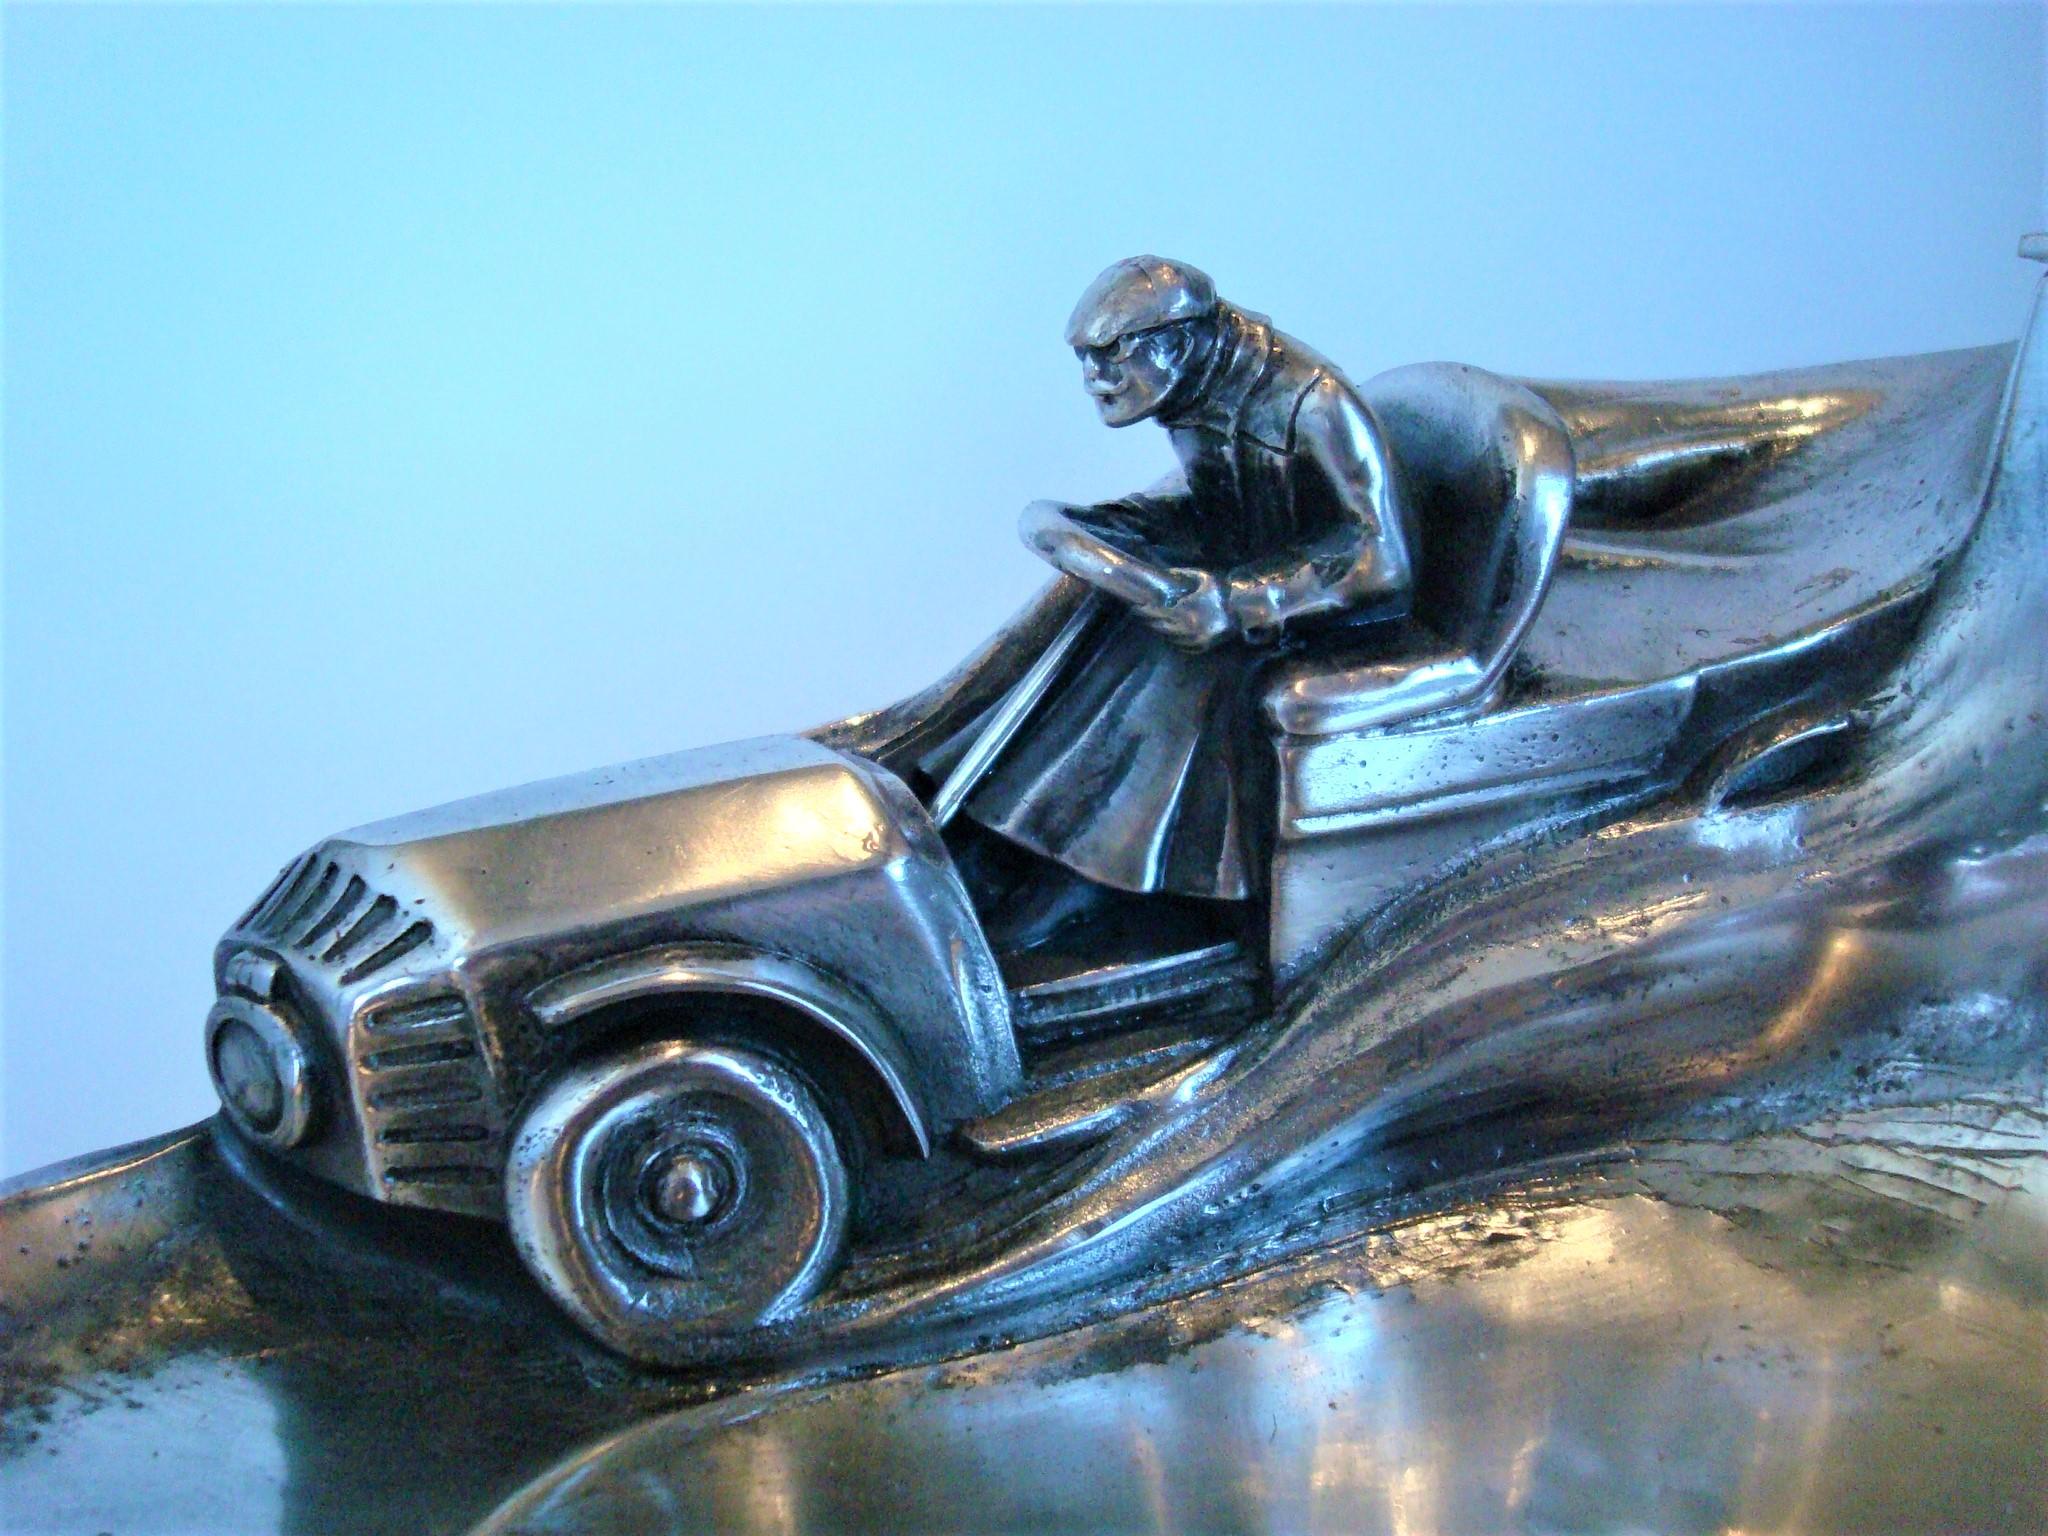 Inkwell of an Automobile and Driver, ca. 1905-1915 Automobilia
Silvered Pewter racing car inkwell and pentray
Early race car inkwell sculpture of a Vanderbilt cup race era.
Racing car desk piece, silver plate on pewter.
A wonderful